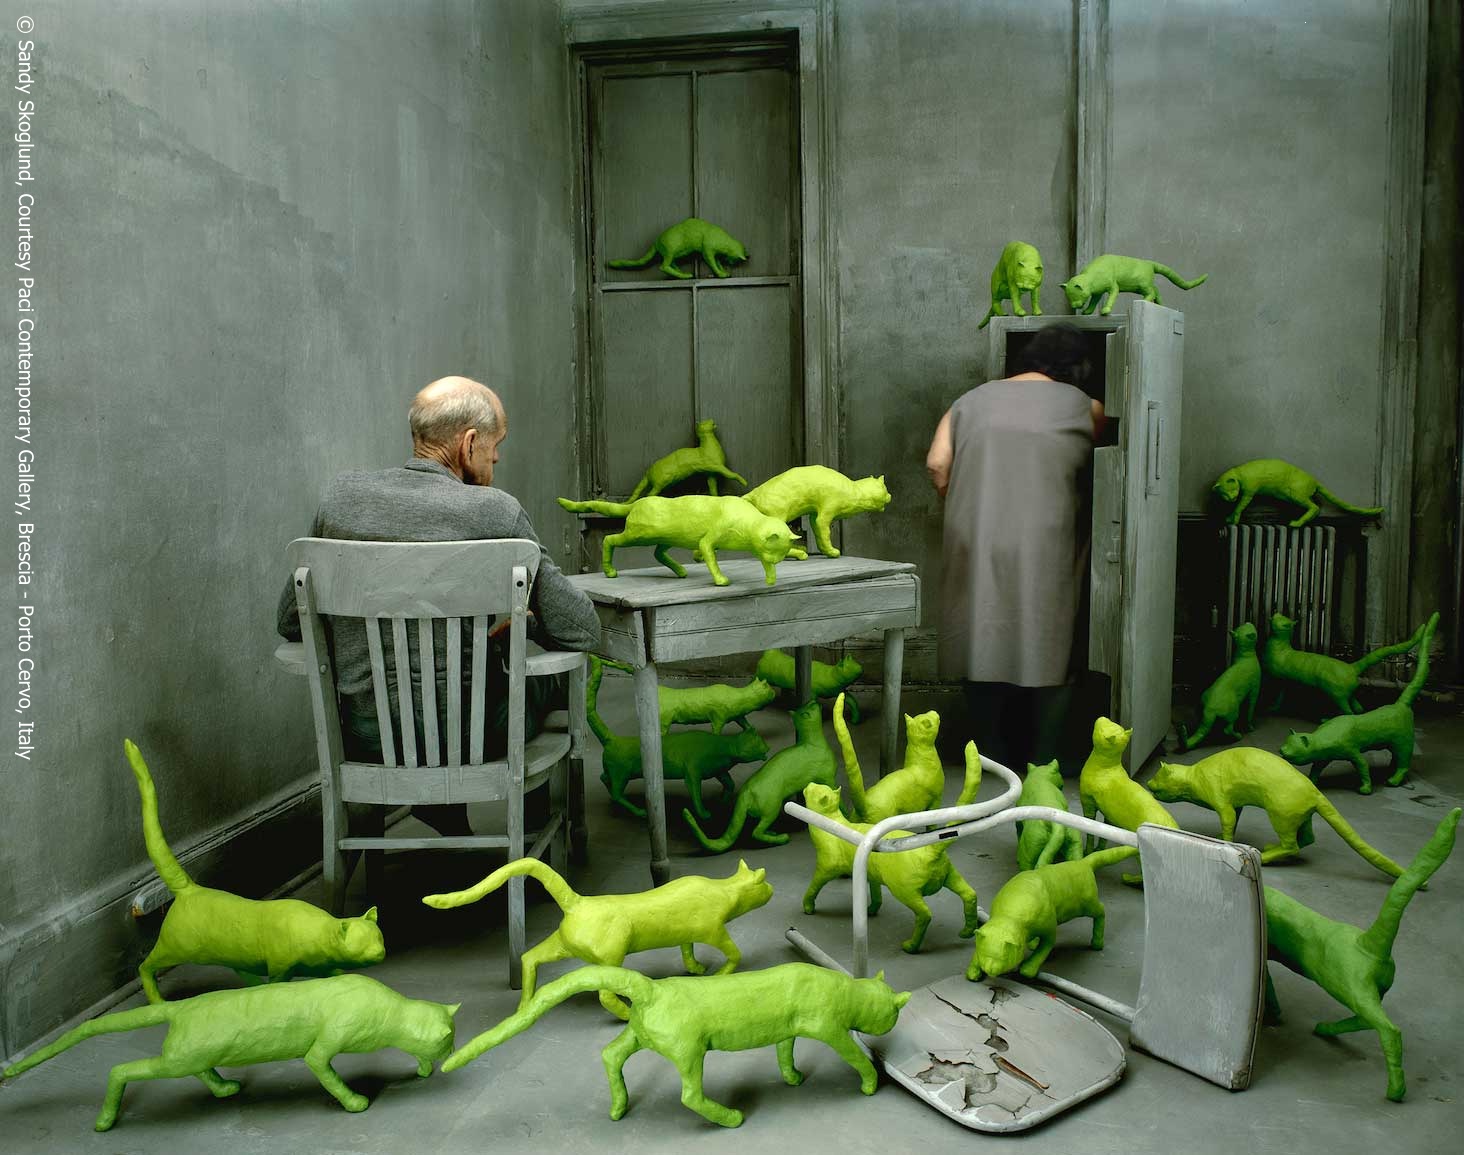 A fine art photograph of a gray kitchen interior with two elderly figures. A man is seated a table and a woman peers away from the viewer into a fridge. Numerous bright green cats run around.